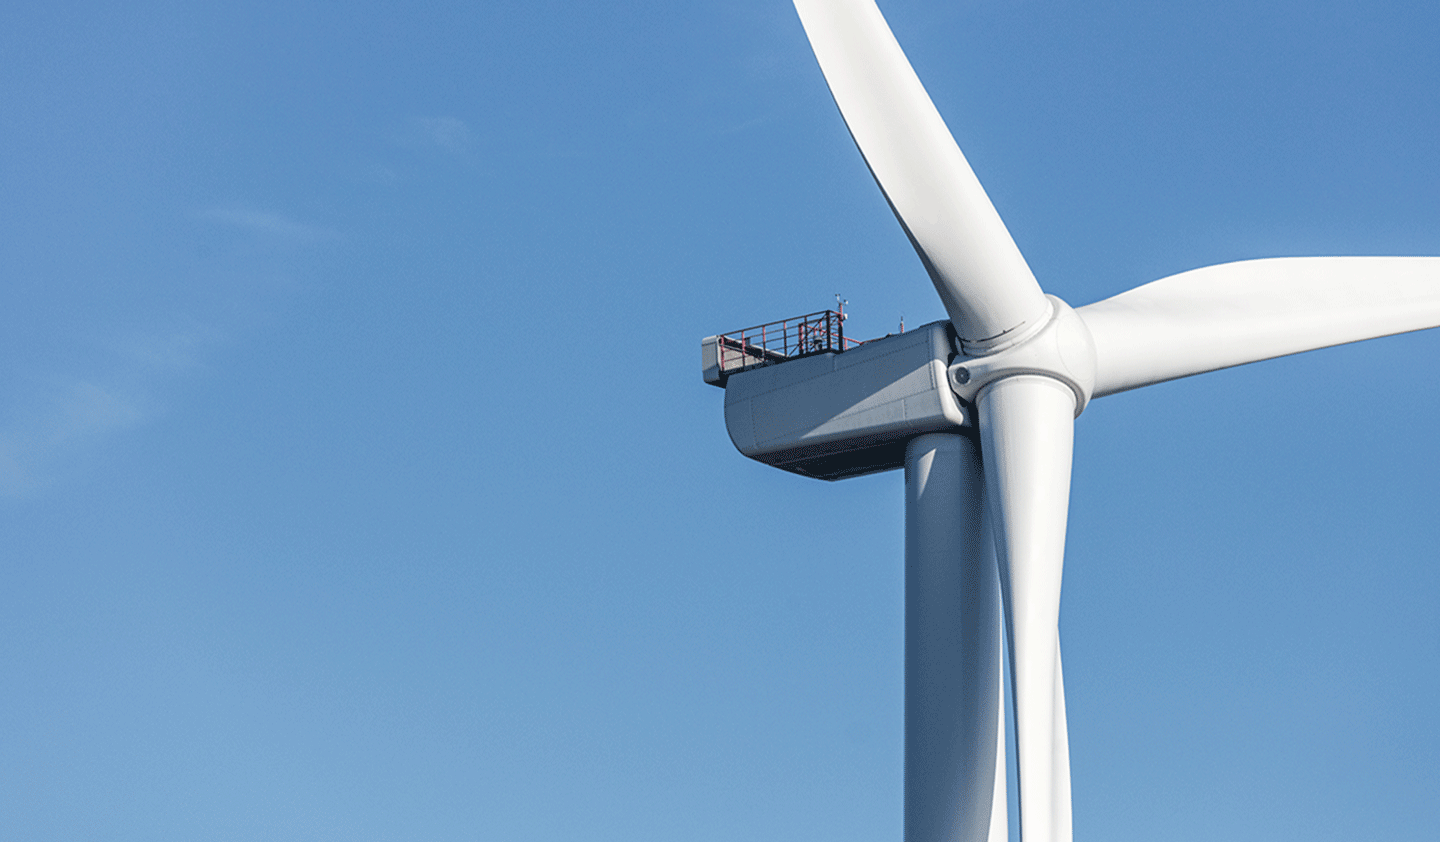 Top of a white Ørsted wind turbine and a clear blue sky.